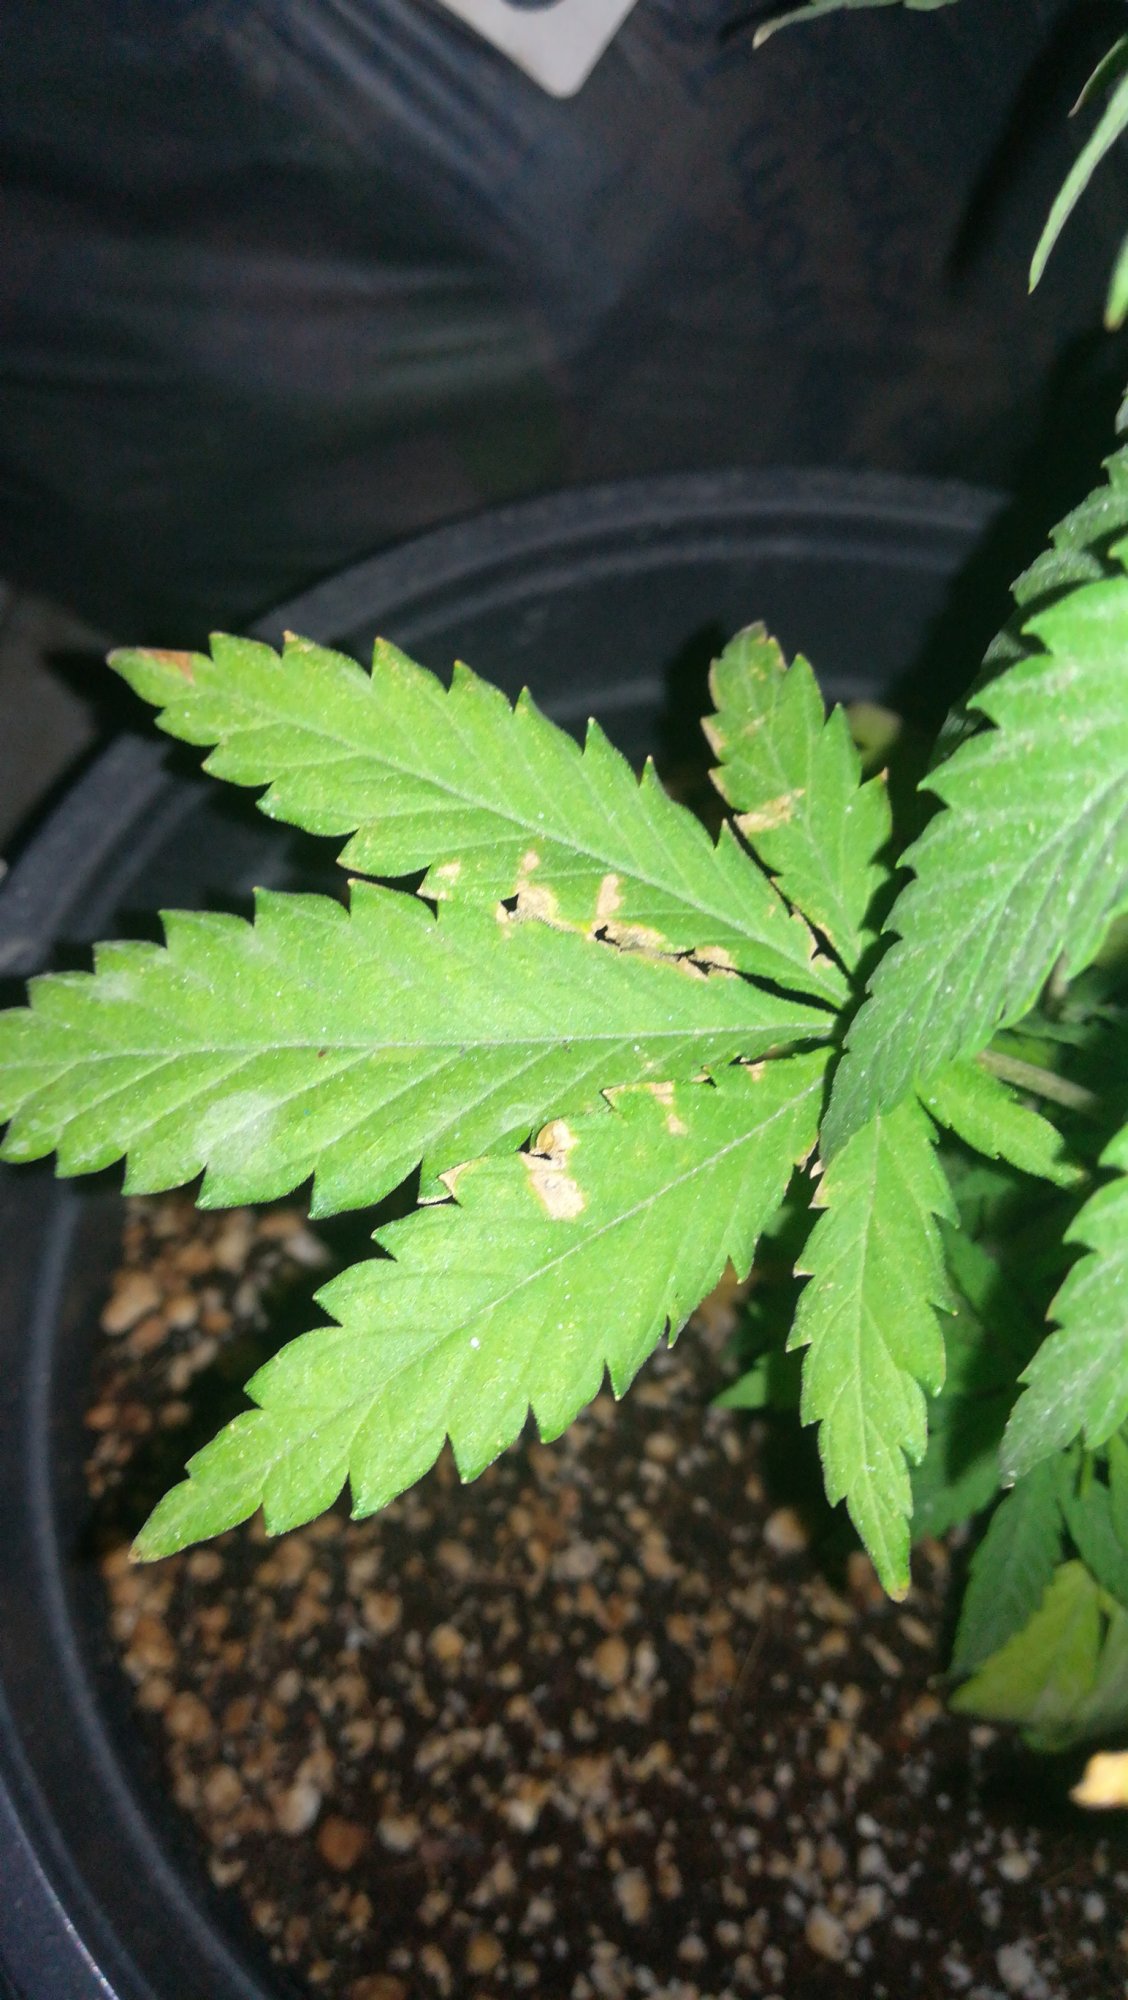 Black spots and yellowbrown spots on leaves 4